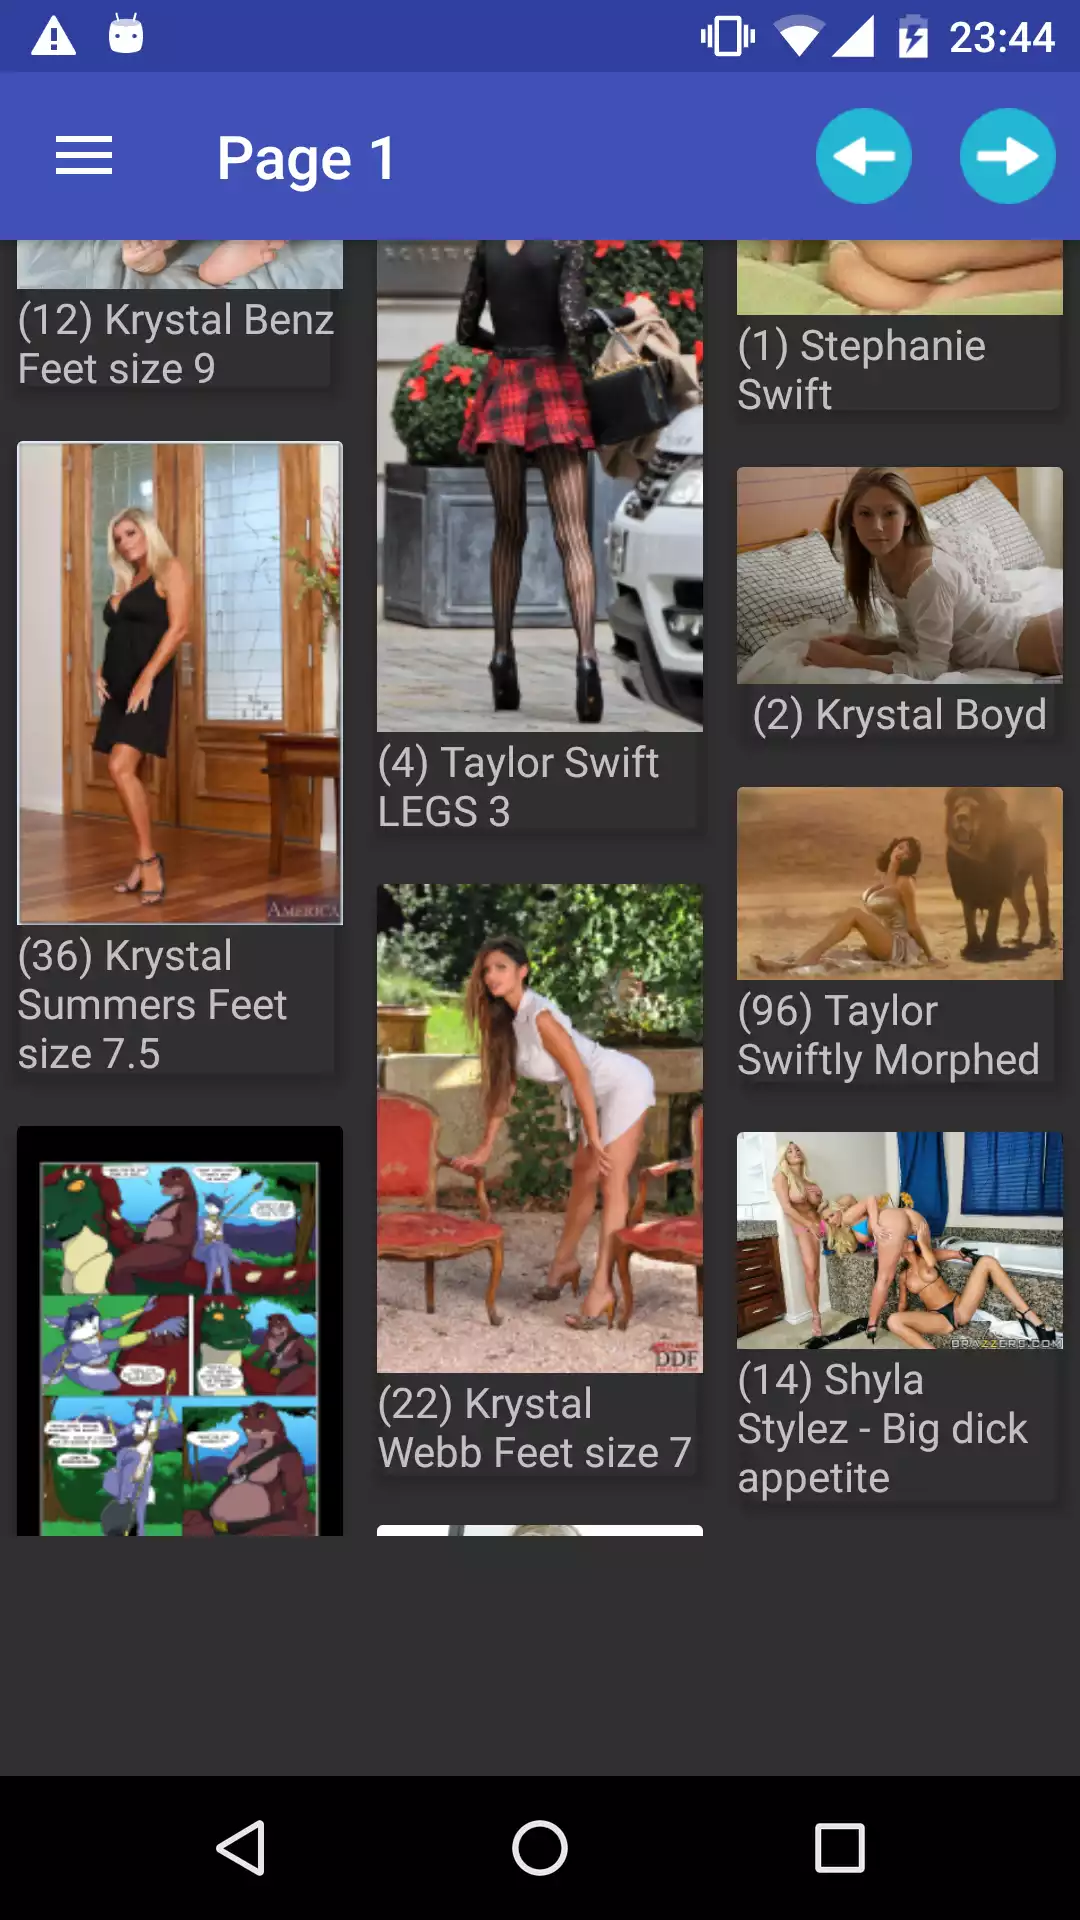 krystal-swift wallpapers,apps,erotic,for,android,wallpaper,download,hot,galleries,daily,photo,picks,shemale,sexy,updates,hentai,adult,phone,app,pornstar,pics,backgrounds